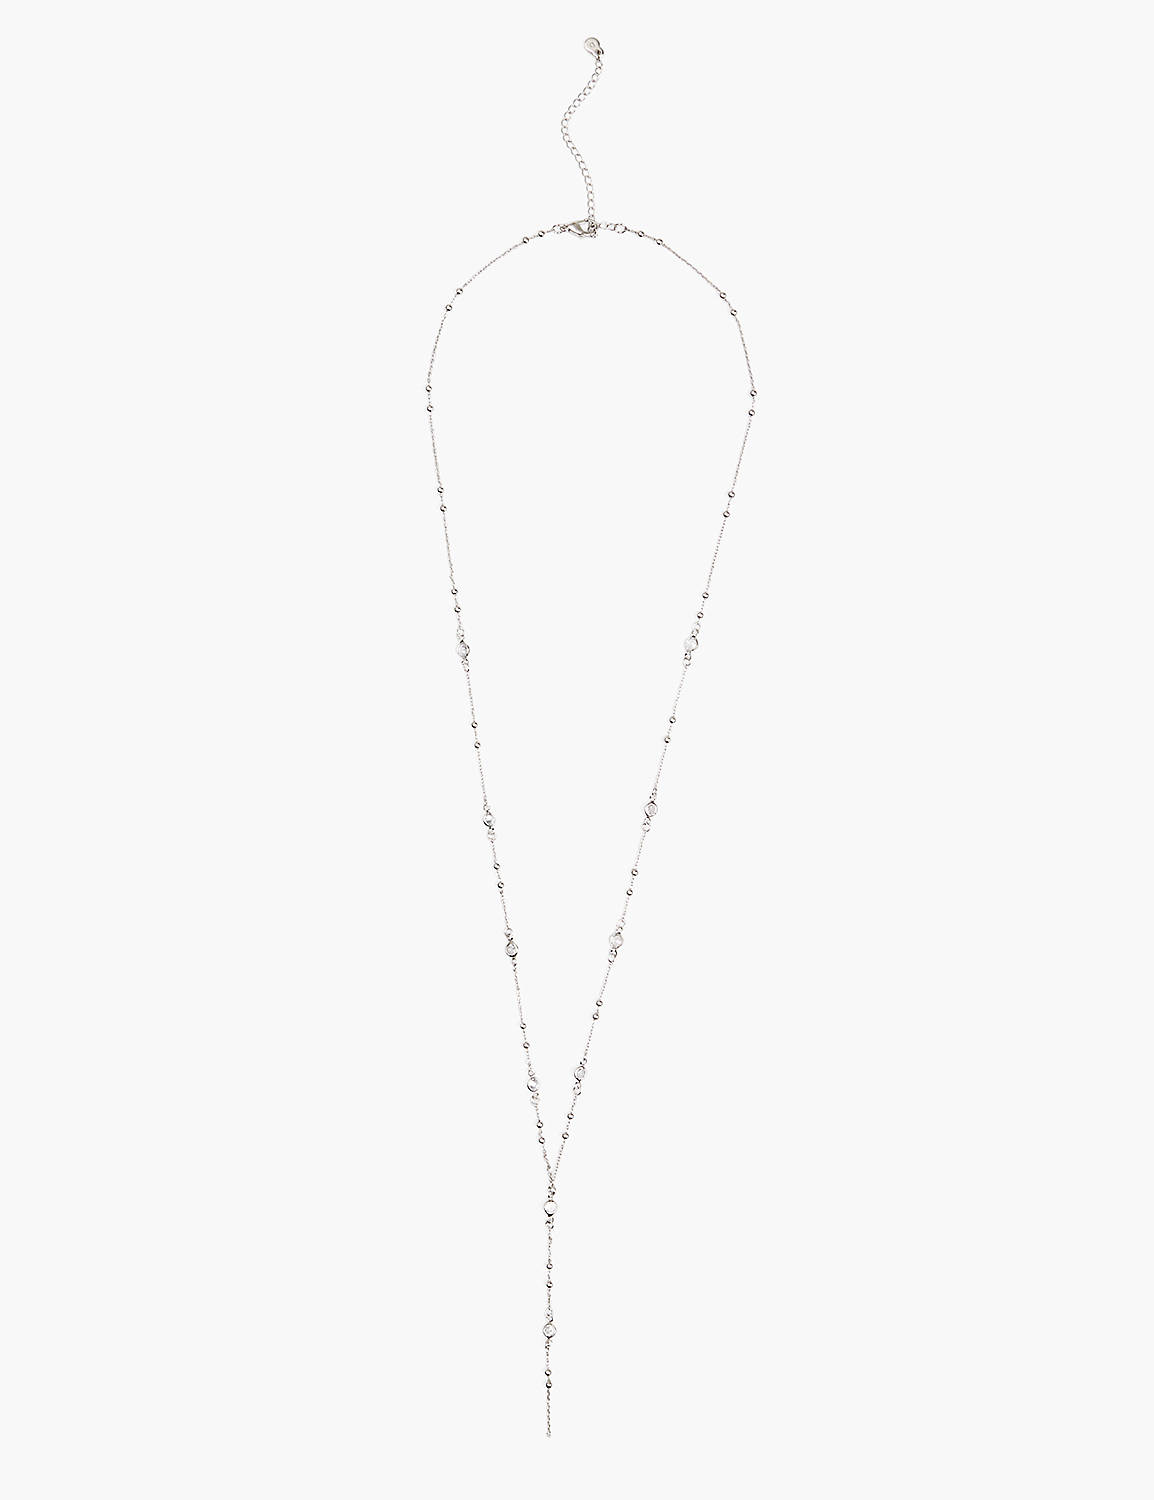 Crystal Y Necklace Product Image 1